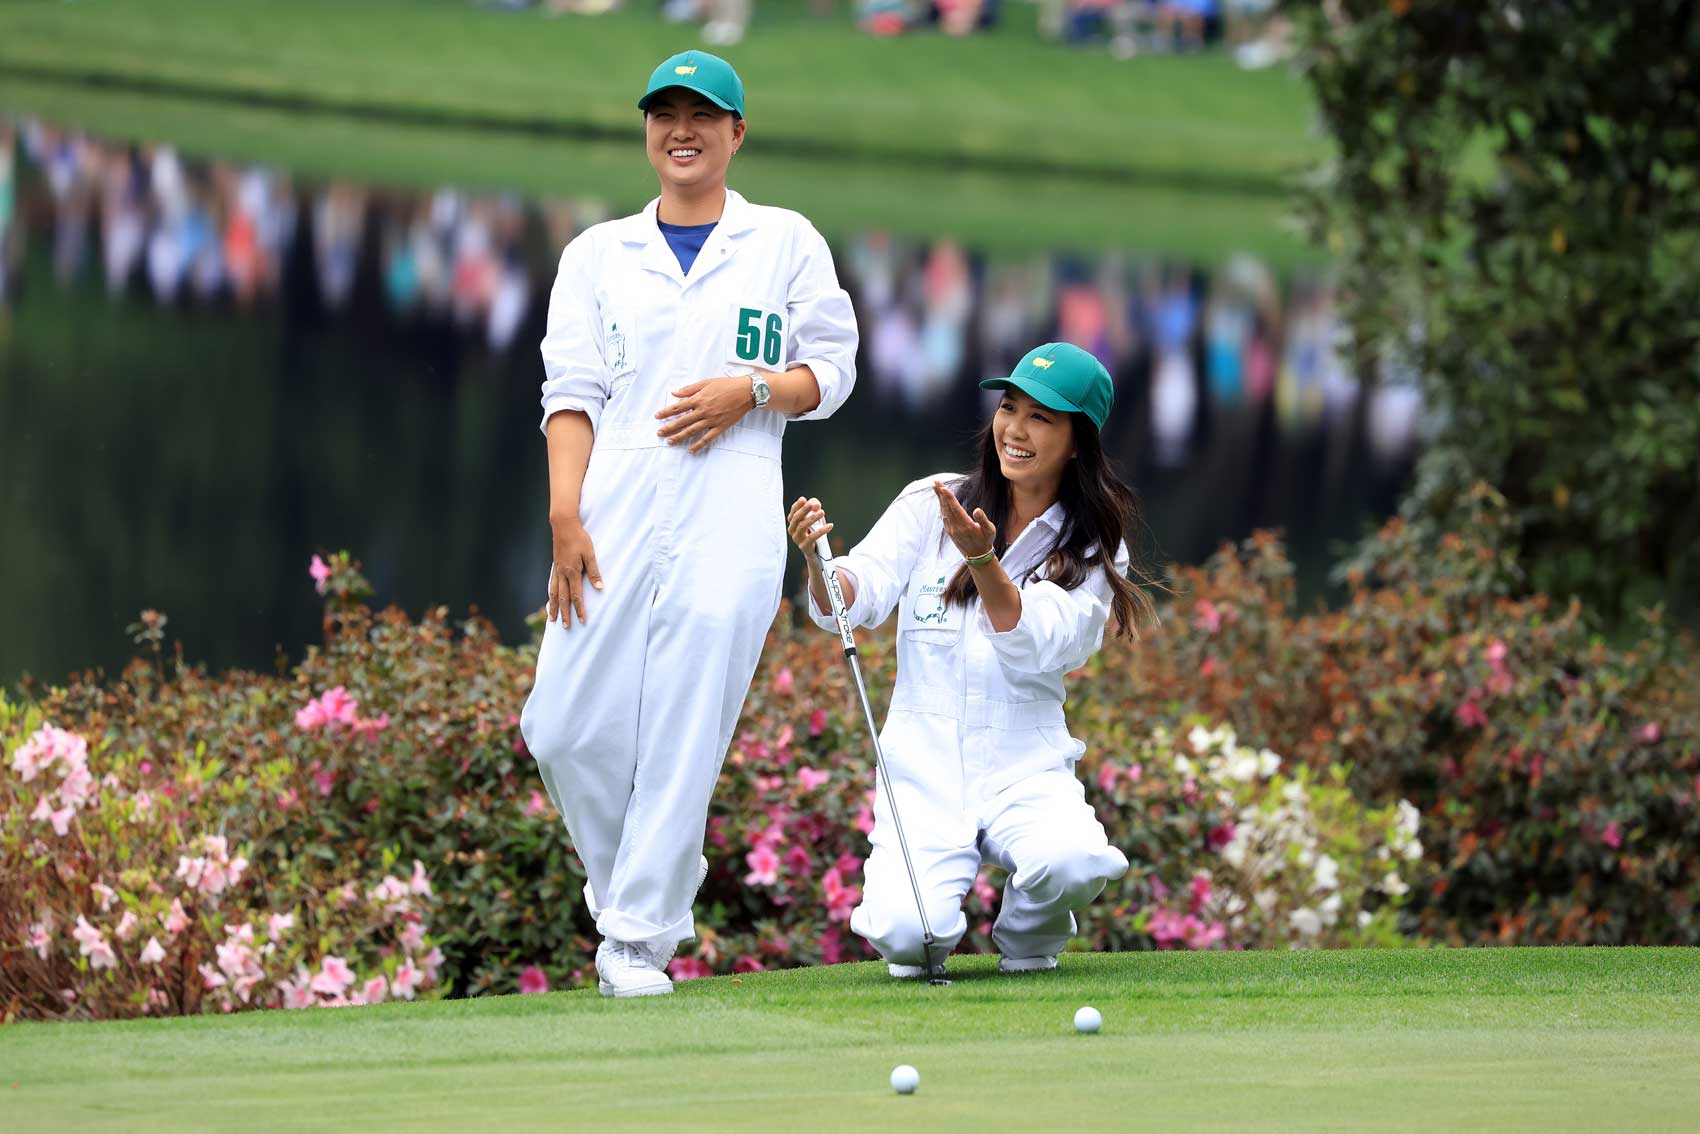 Why Masters Caddies Wear White Jumpsuits & Where to Buy